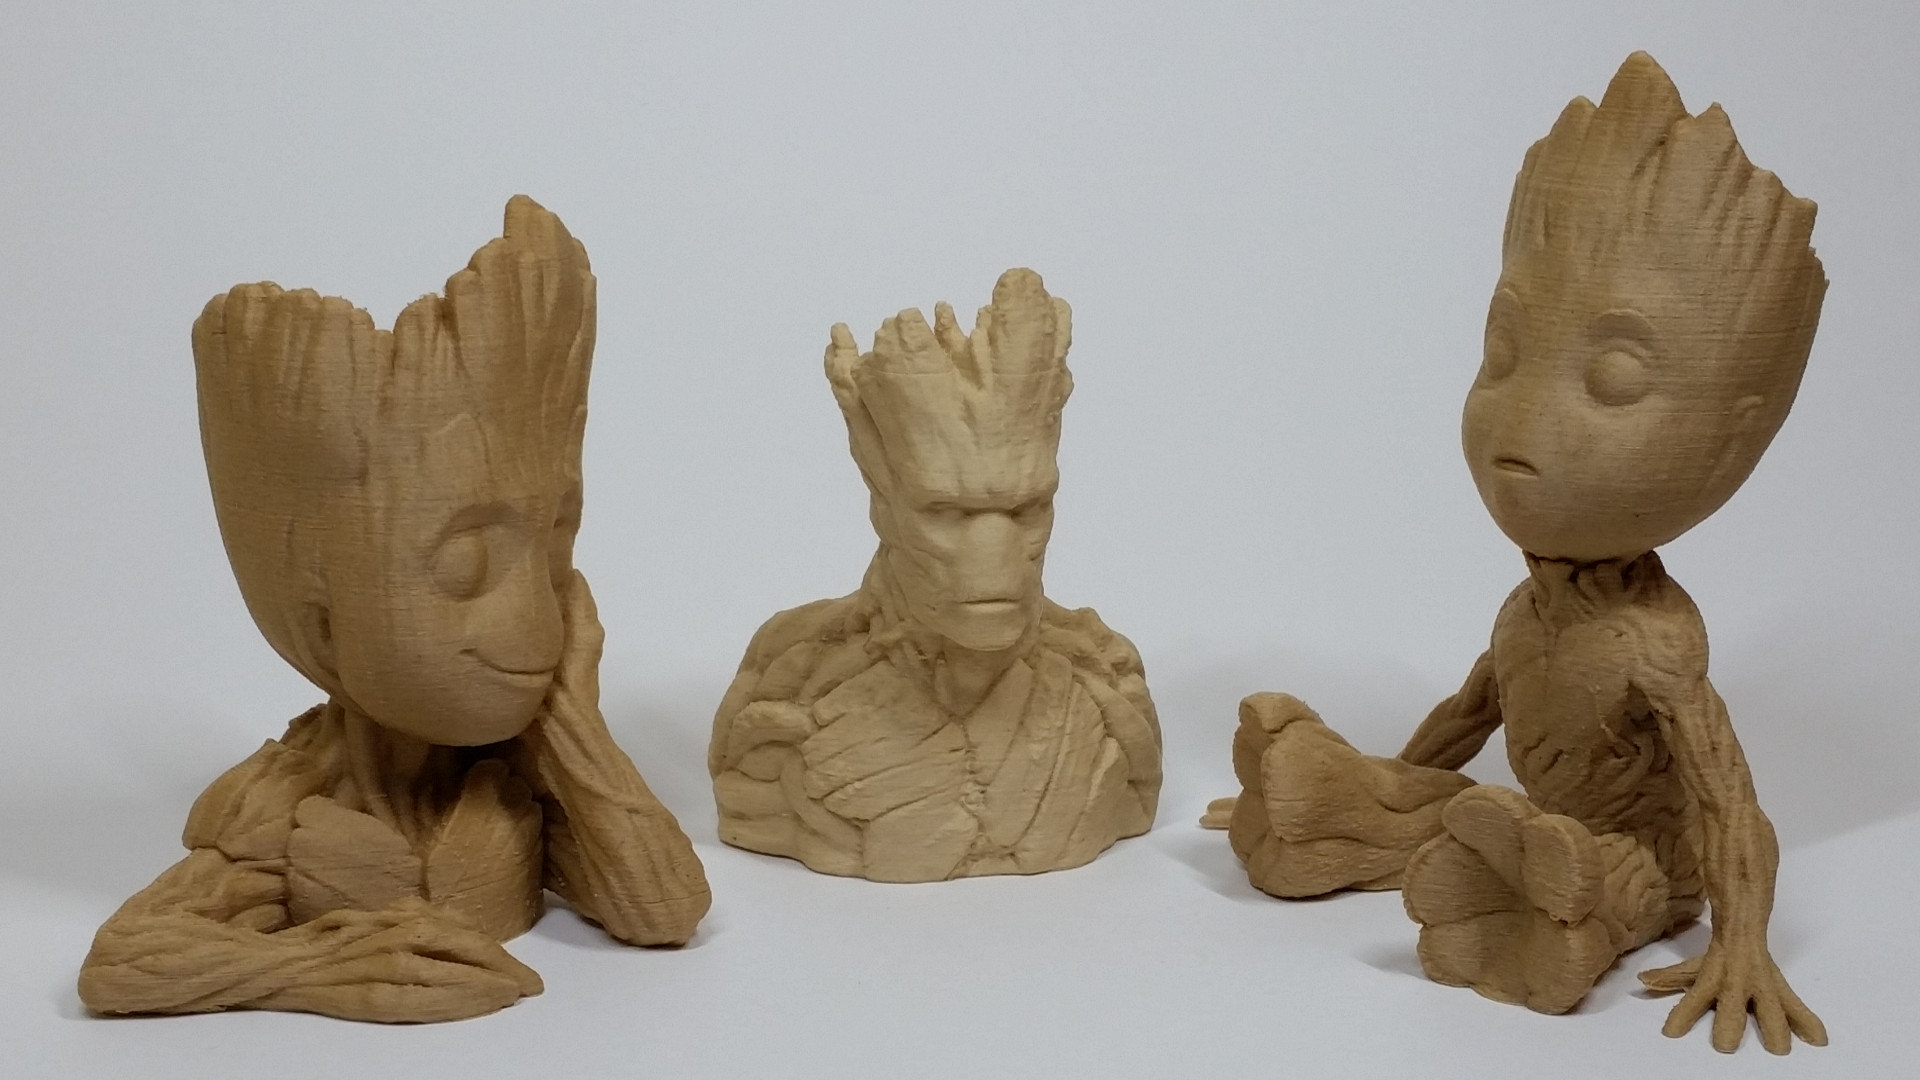 groot-3d-print-models-to-make-your-day-gambody-3d-printing-blog